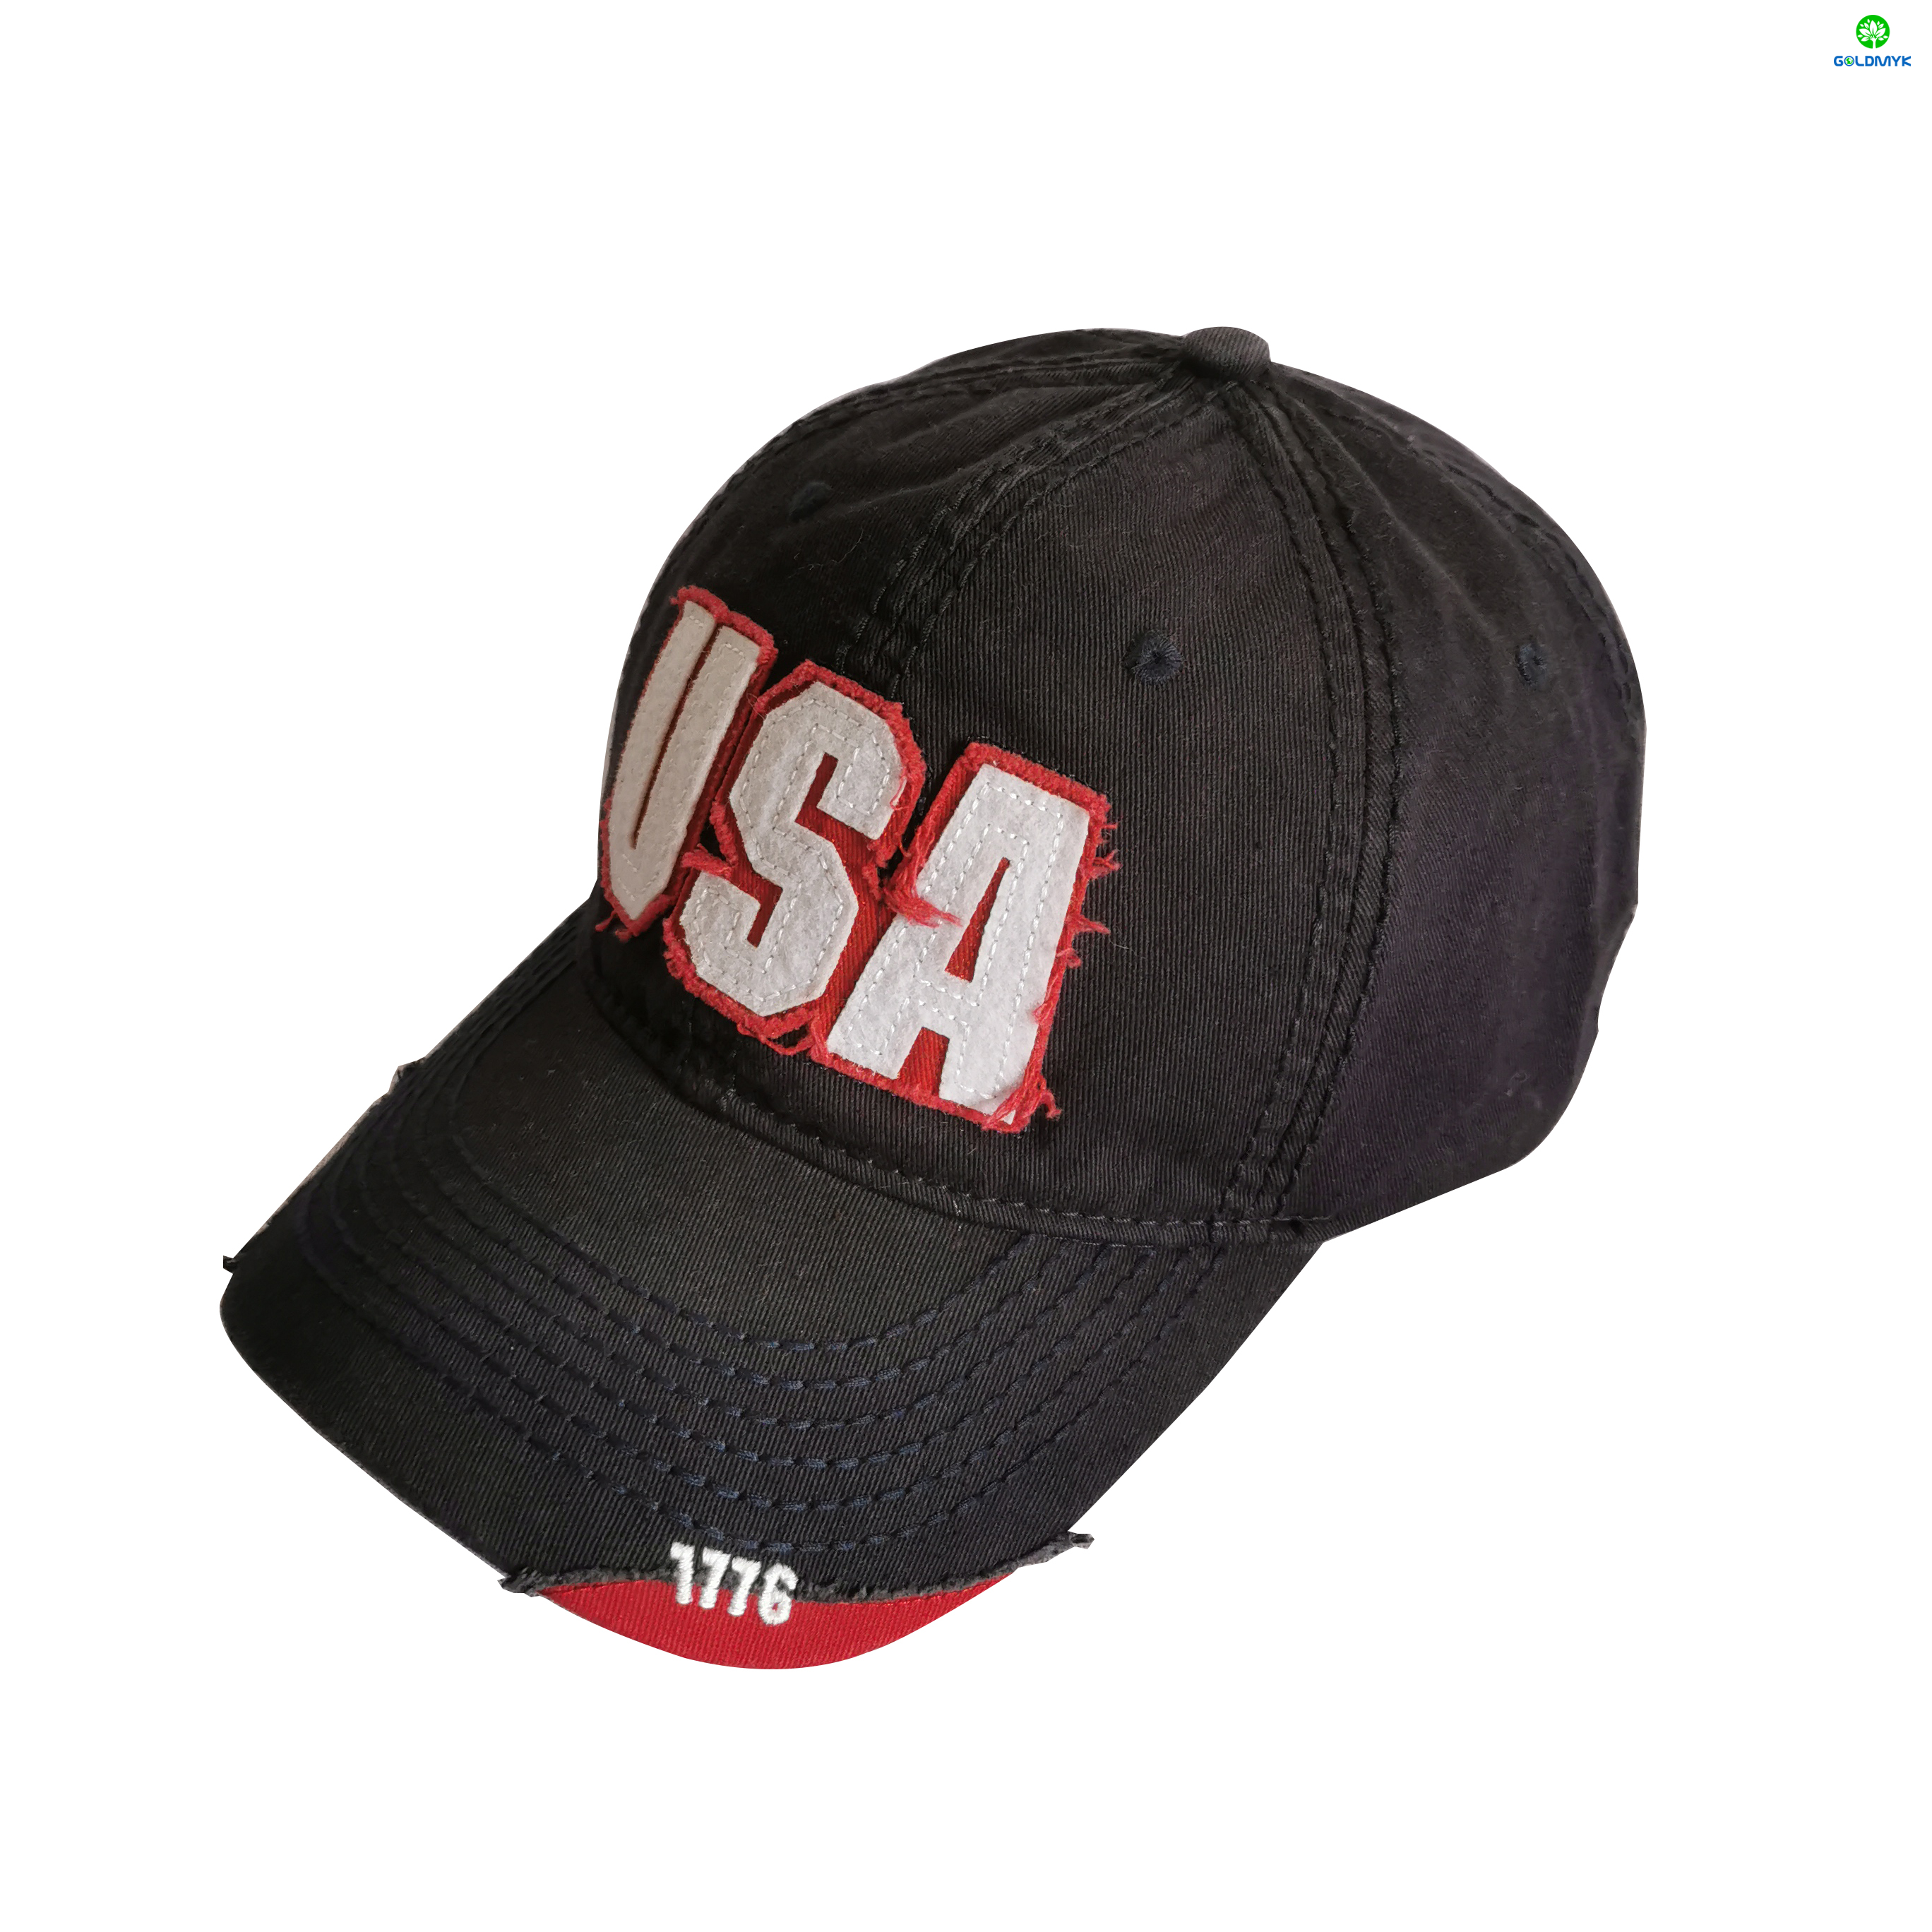 100% Cotton Felt Embroidery Patch Distressed Washed Baseball Cap 